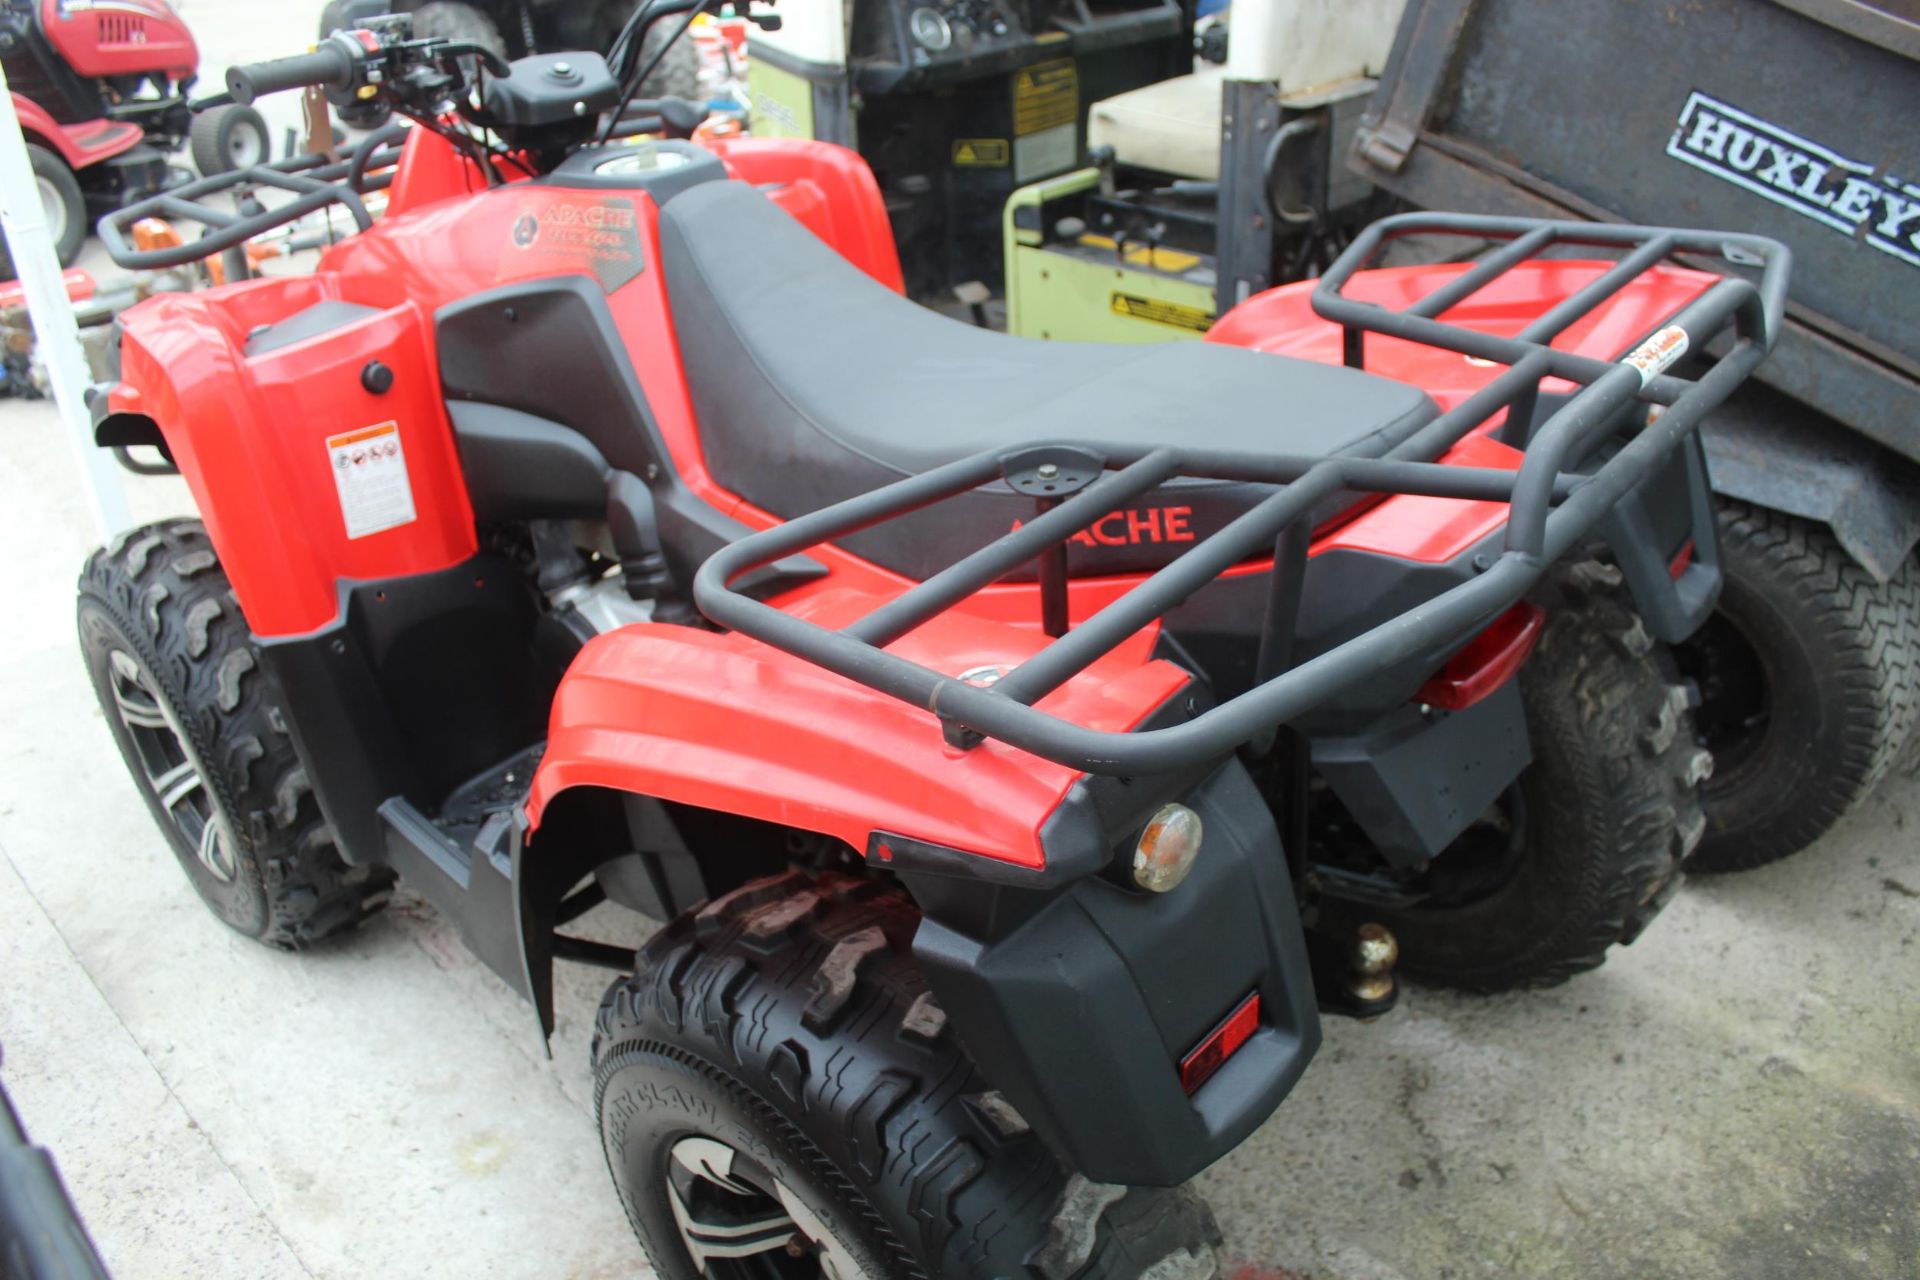 2019 APACHE 420 QUAD 400 HOURS, WINCH, NEW MAXXIS TYRES, 4 WHEEL DRIVE, ELECTRIC START, ROAD KIT. - Bild 3 aus 3